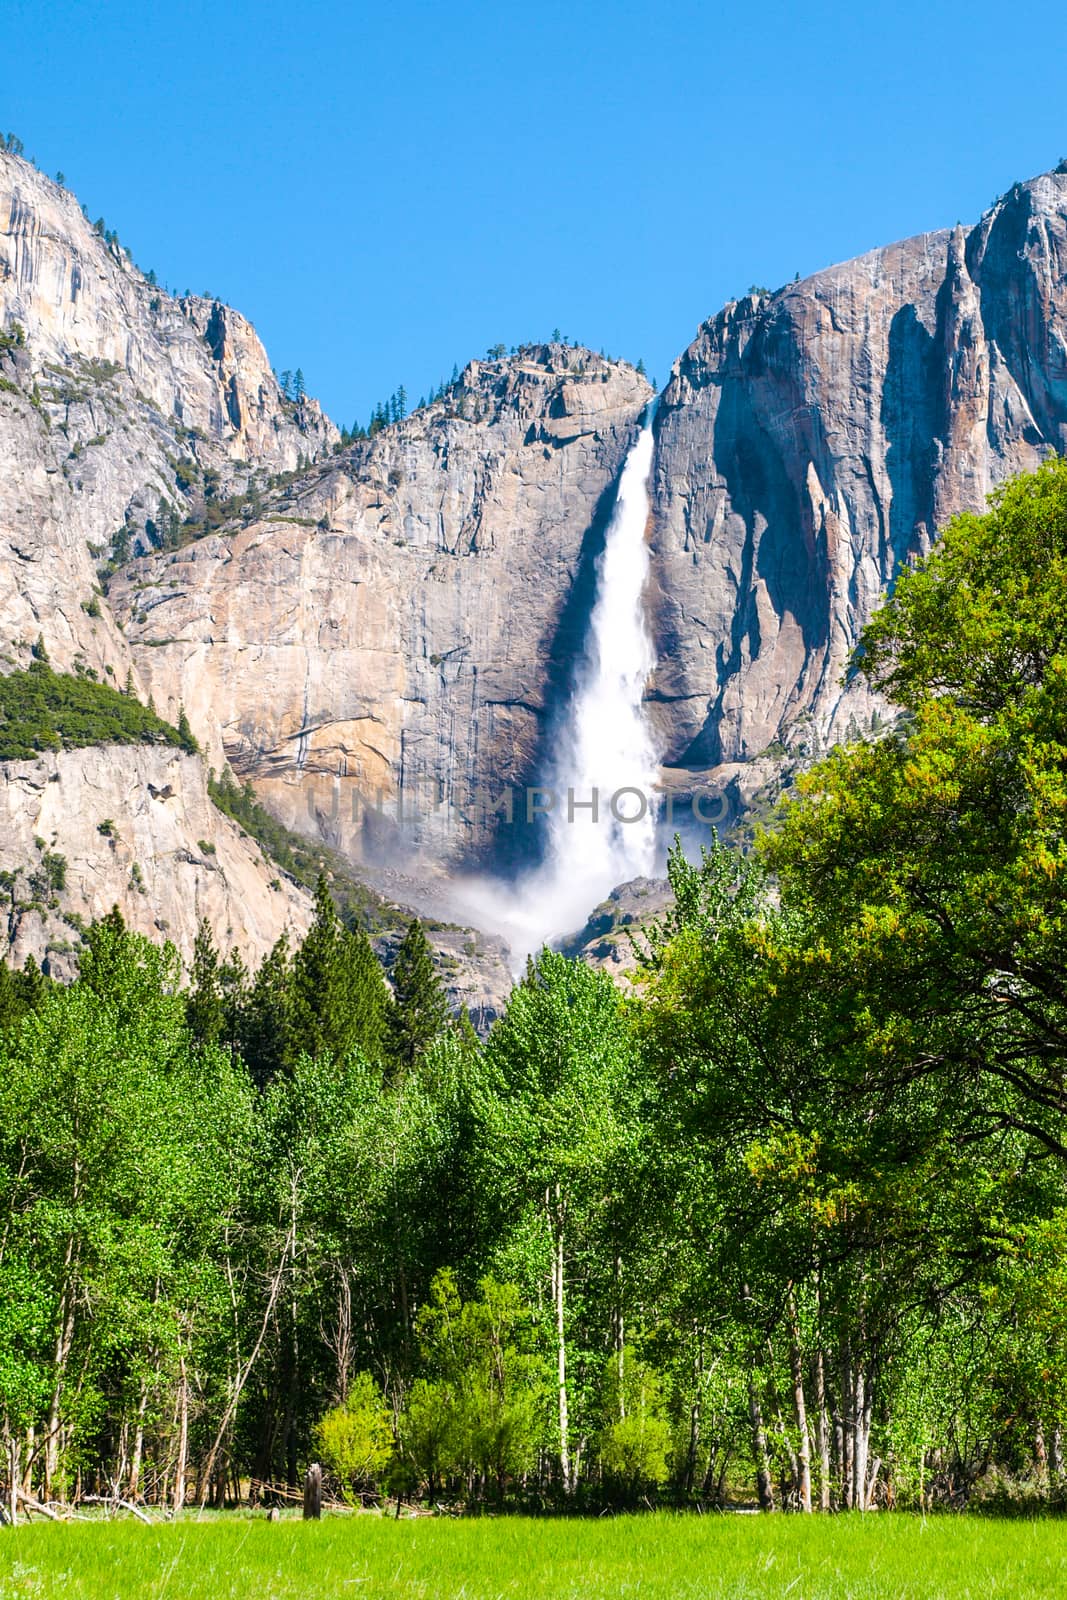 Upper Yosemite Fall, the highest waterfall in Yosemite National Park, California, USA by pyty